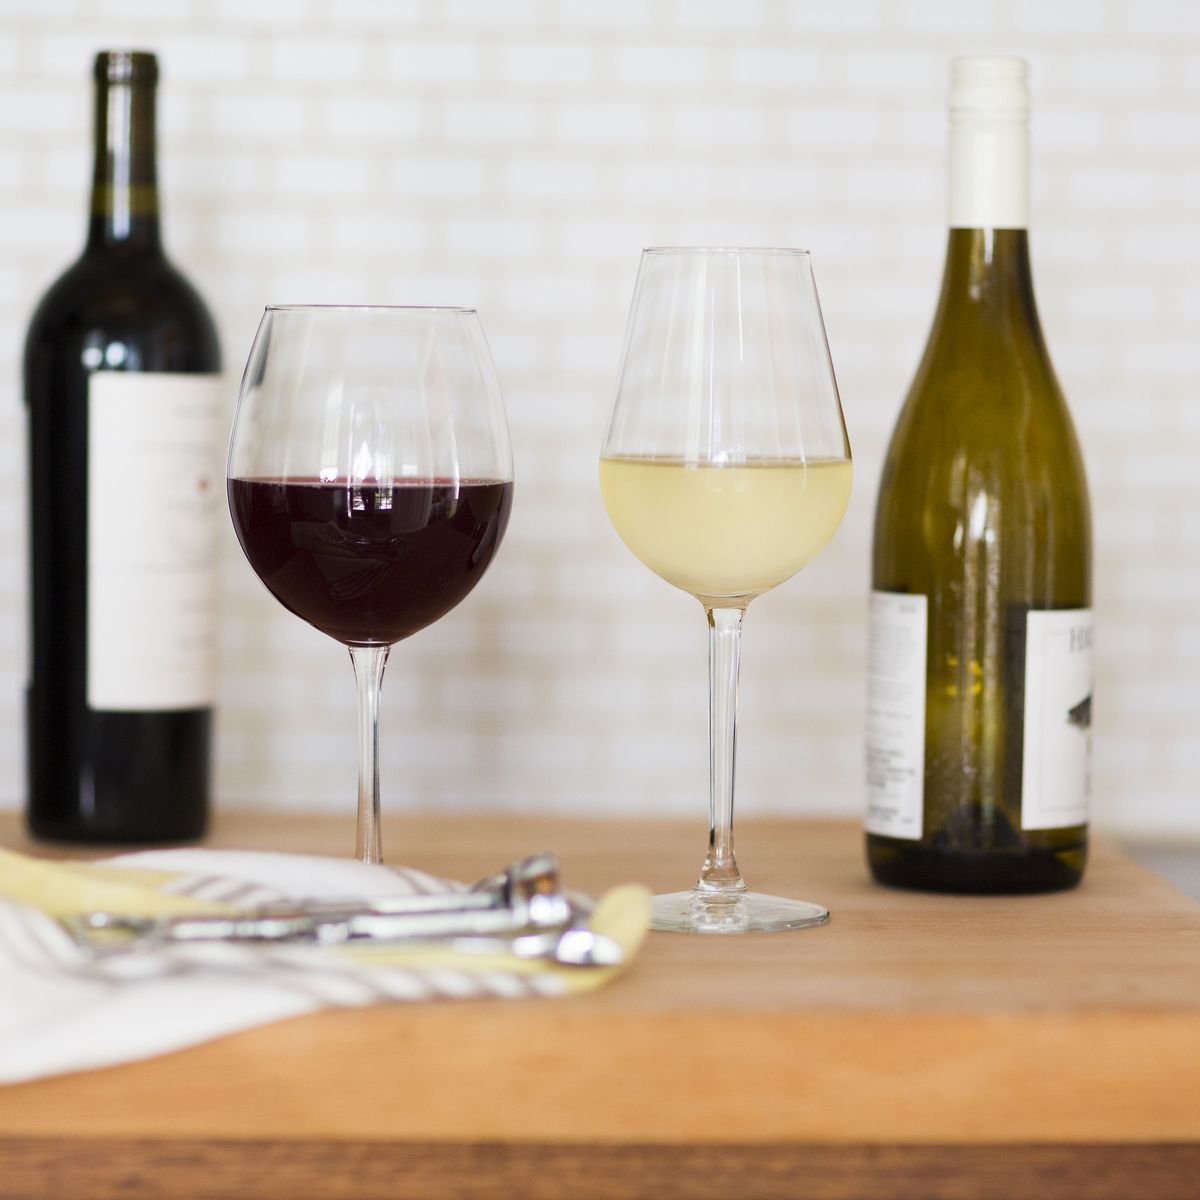 What’s The Difference Between White And Red Wine Glasses?